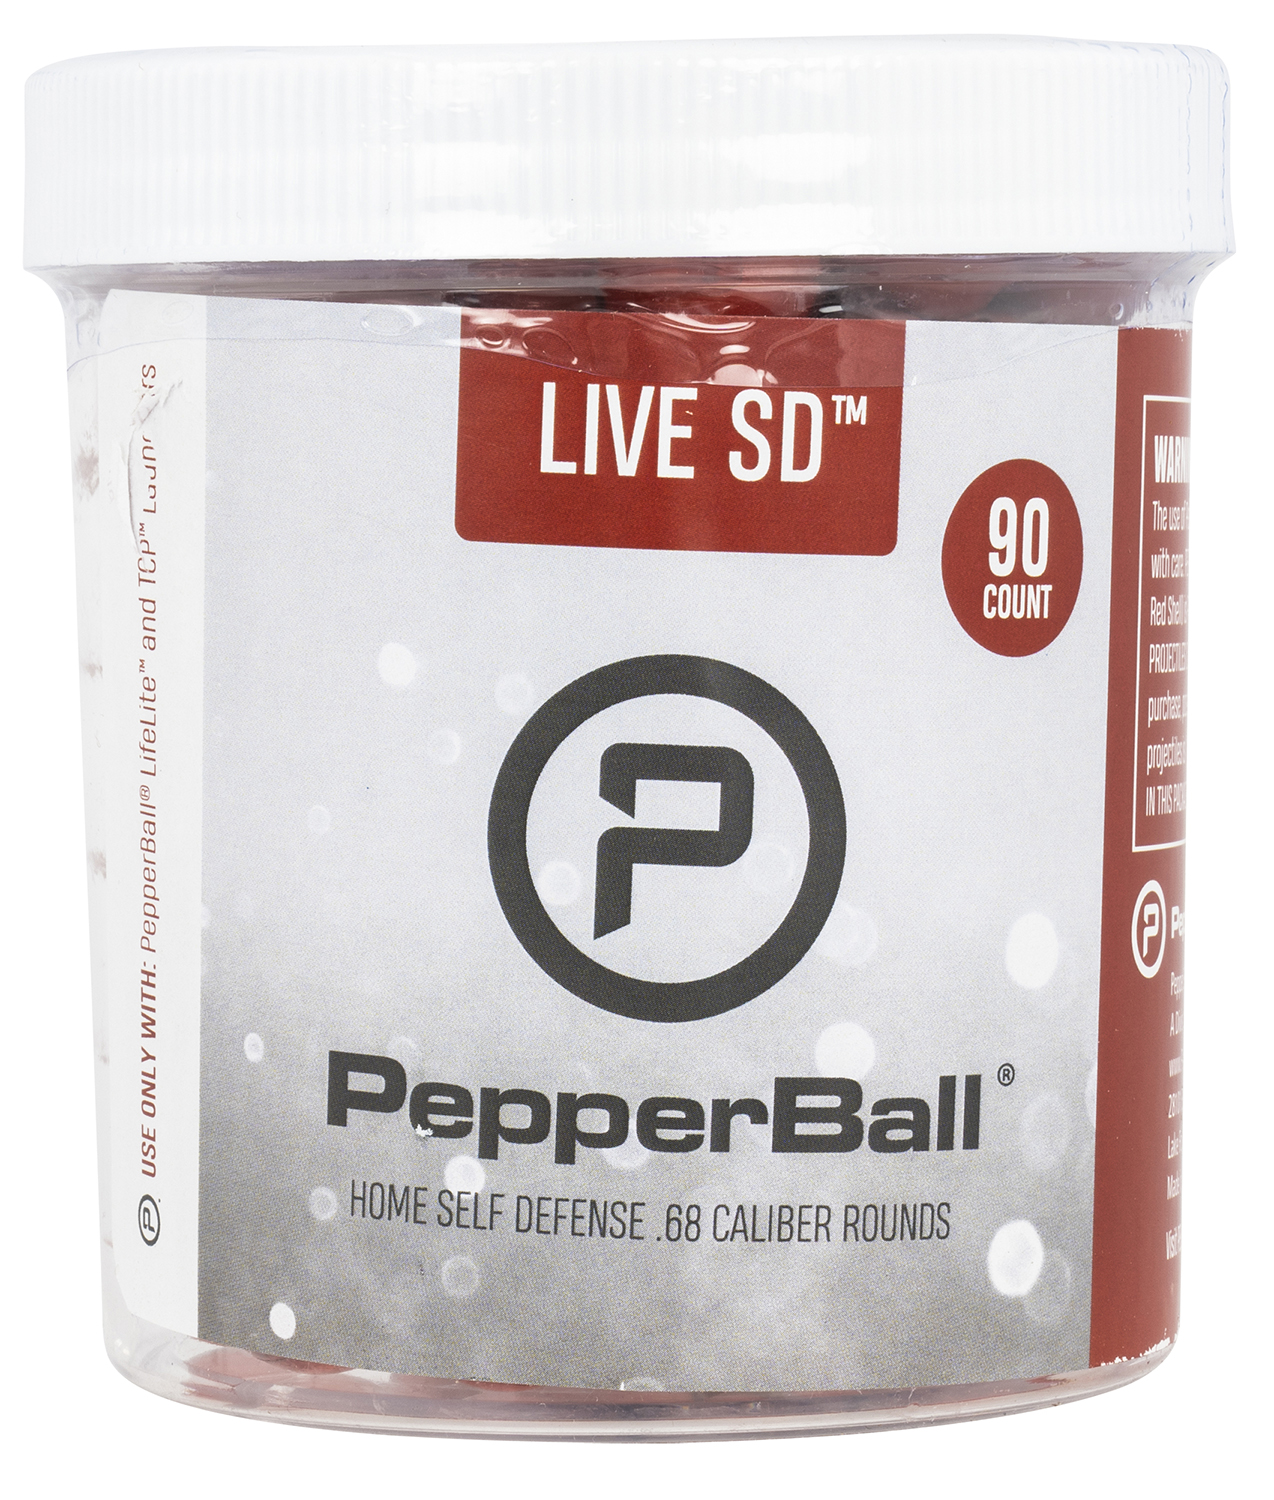 PEPPERBALL LIVE SD .68CAL PROJECTILE 90 PACK